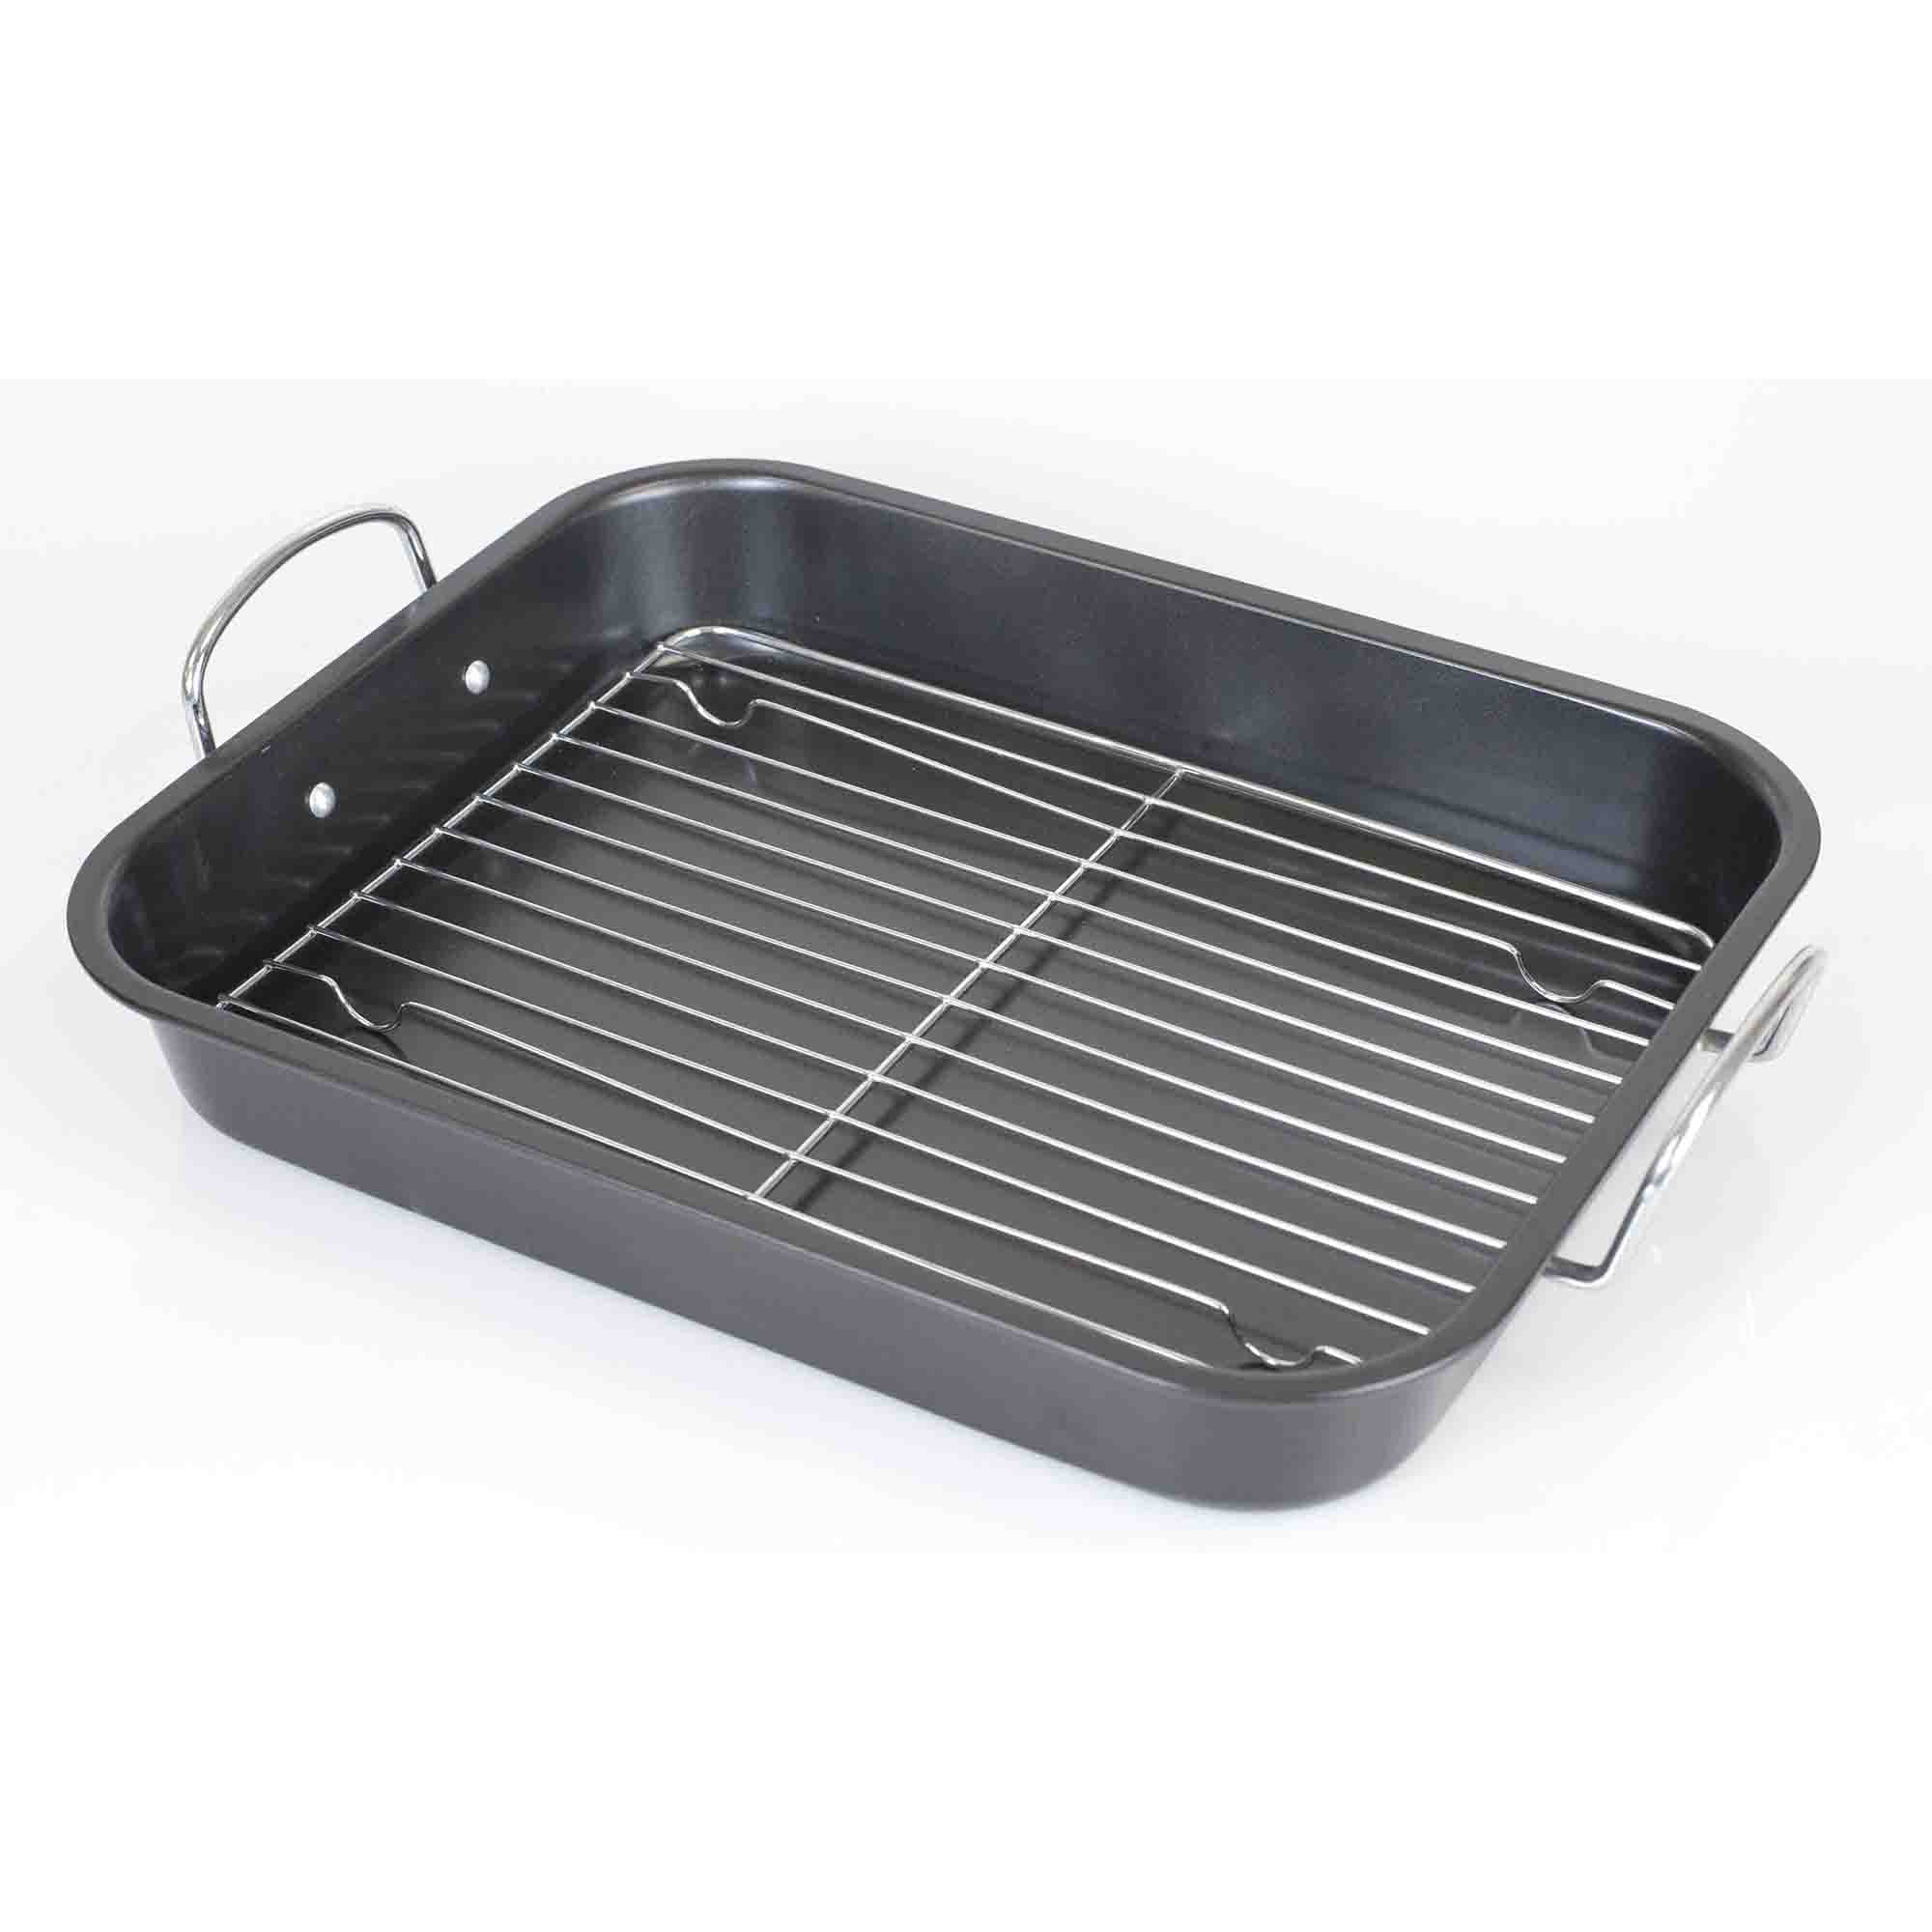 Utiz Grill Pan With Detachable Handle Non Stick Cooking Baking Tray & Wire Rack For Oven Cooker 285mm x 275mm 